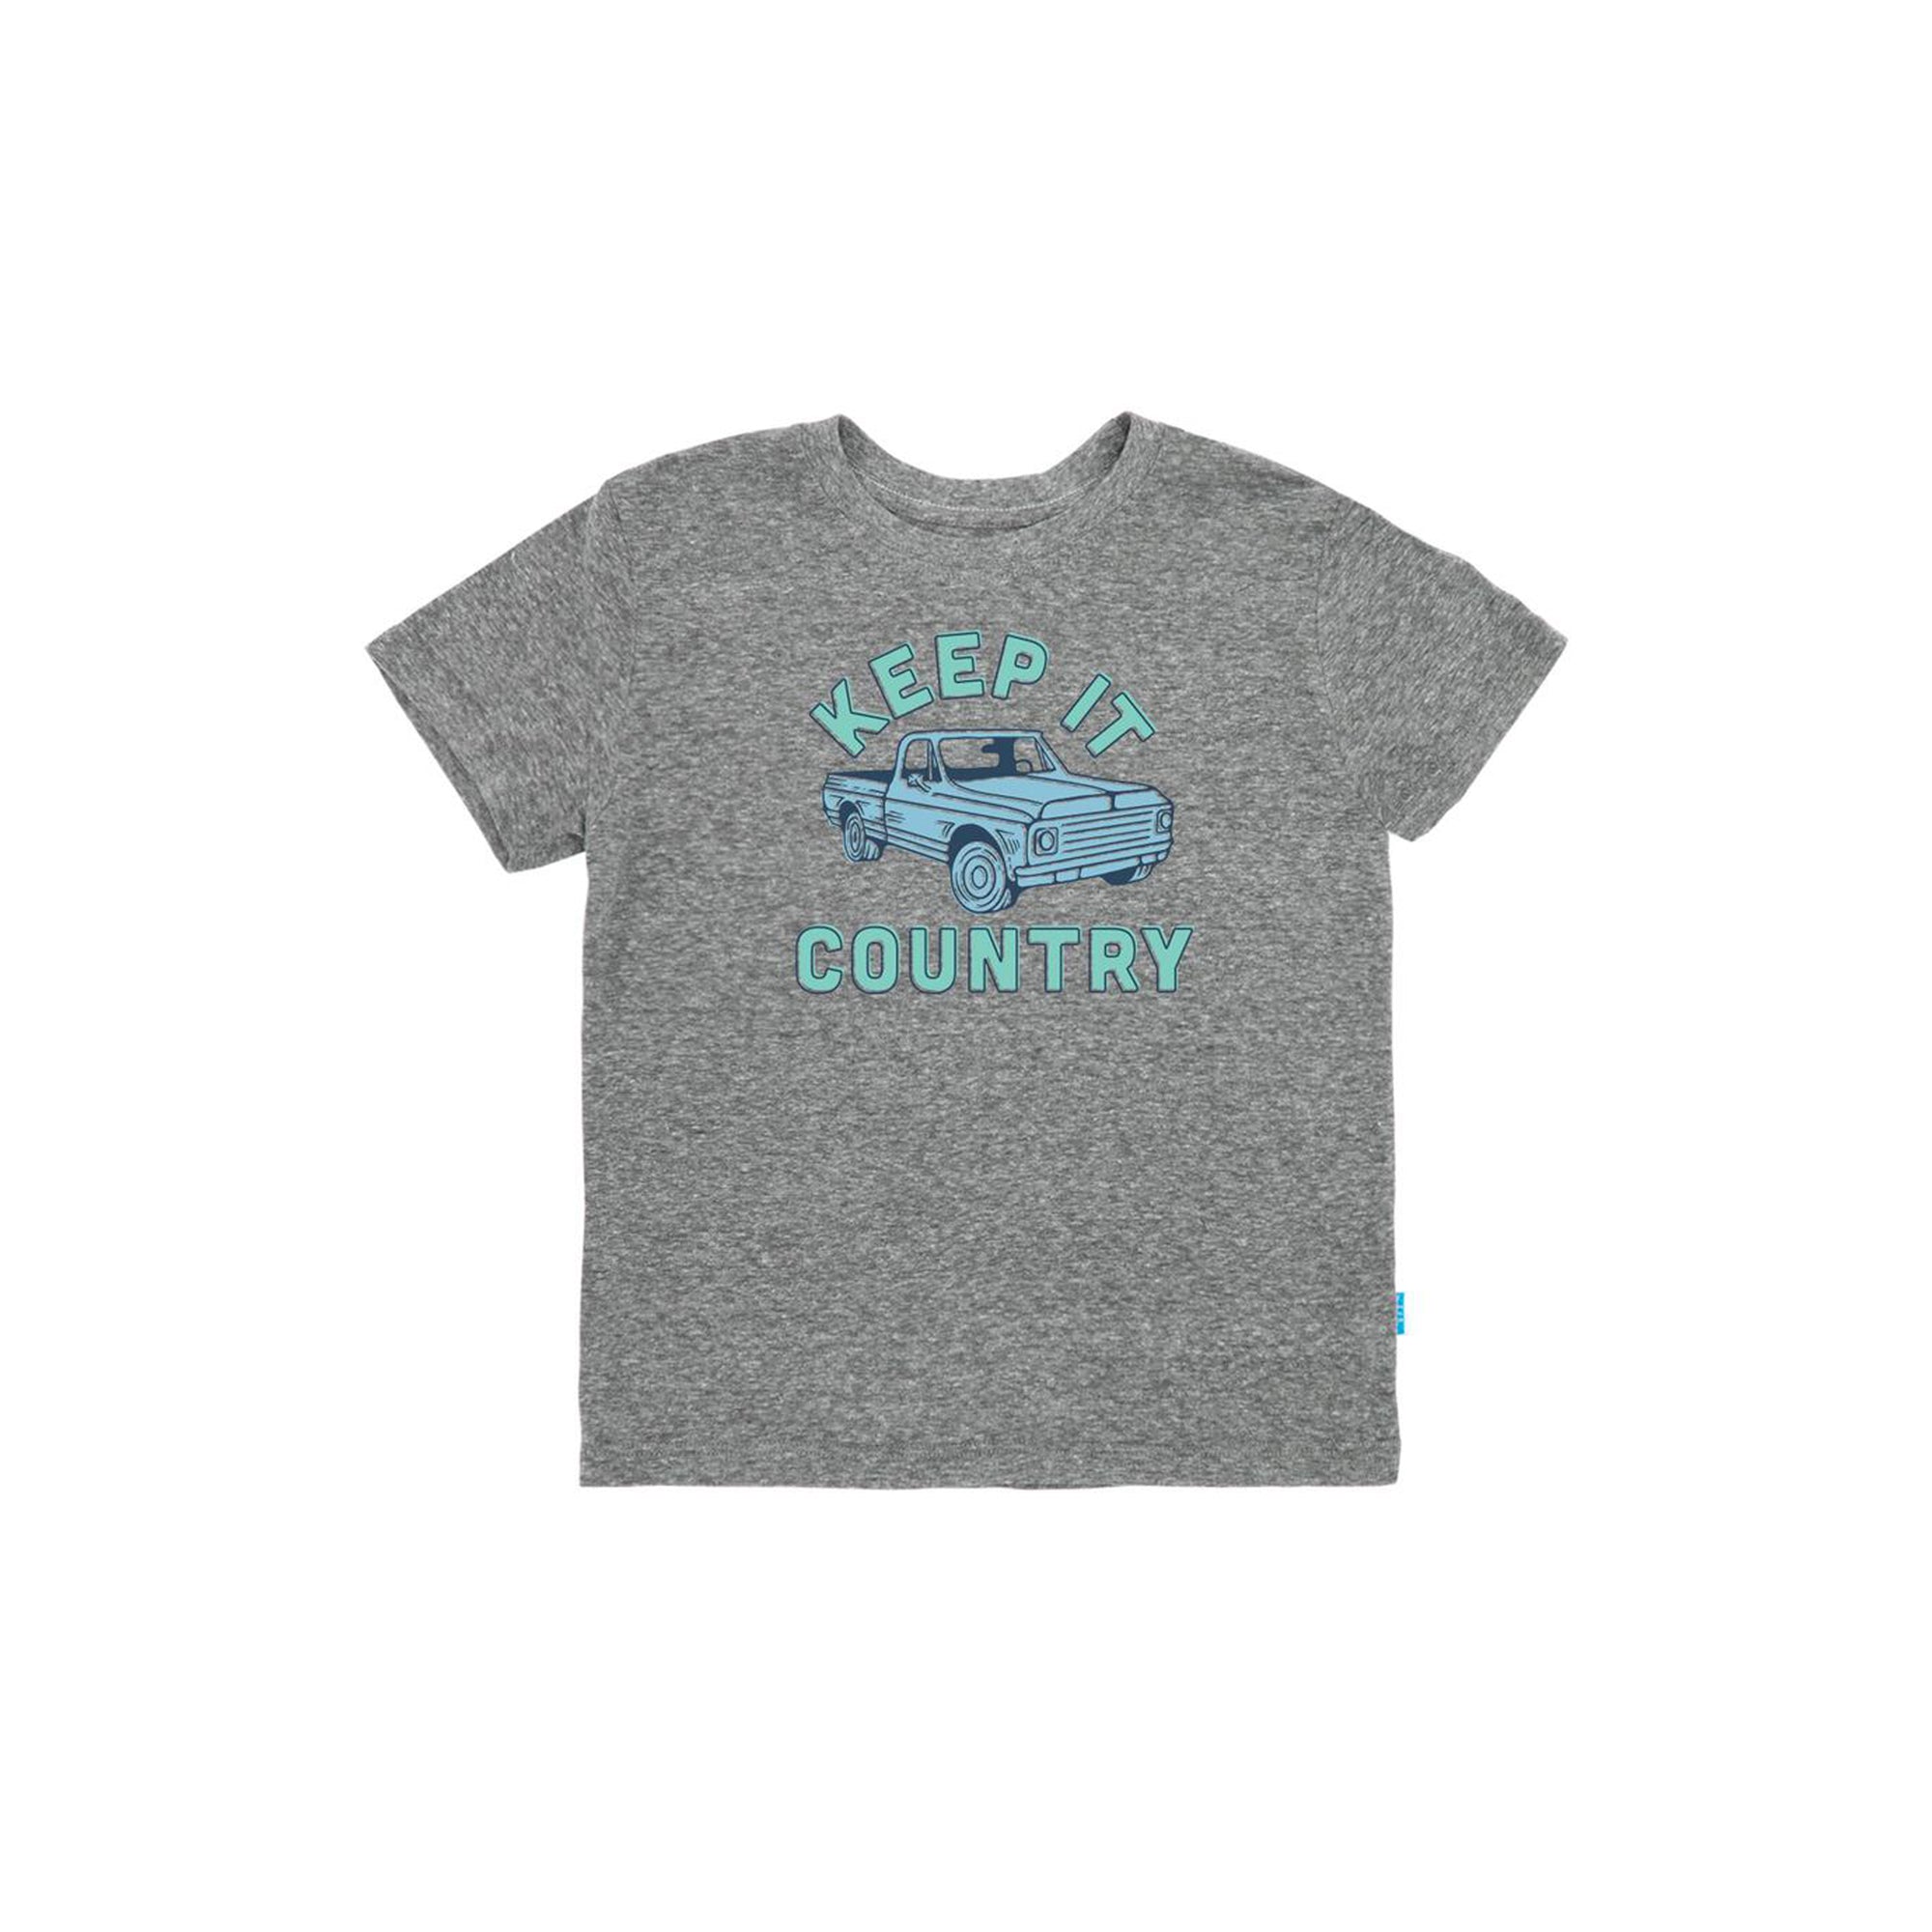 Feather 4 Arrow_Keep it Country Vintage Tee_Tops